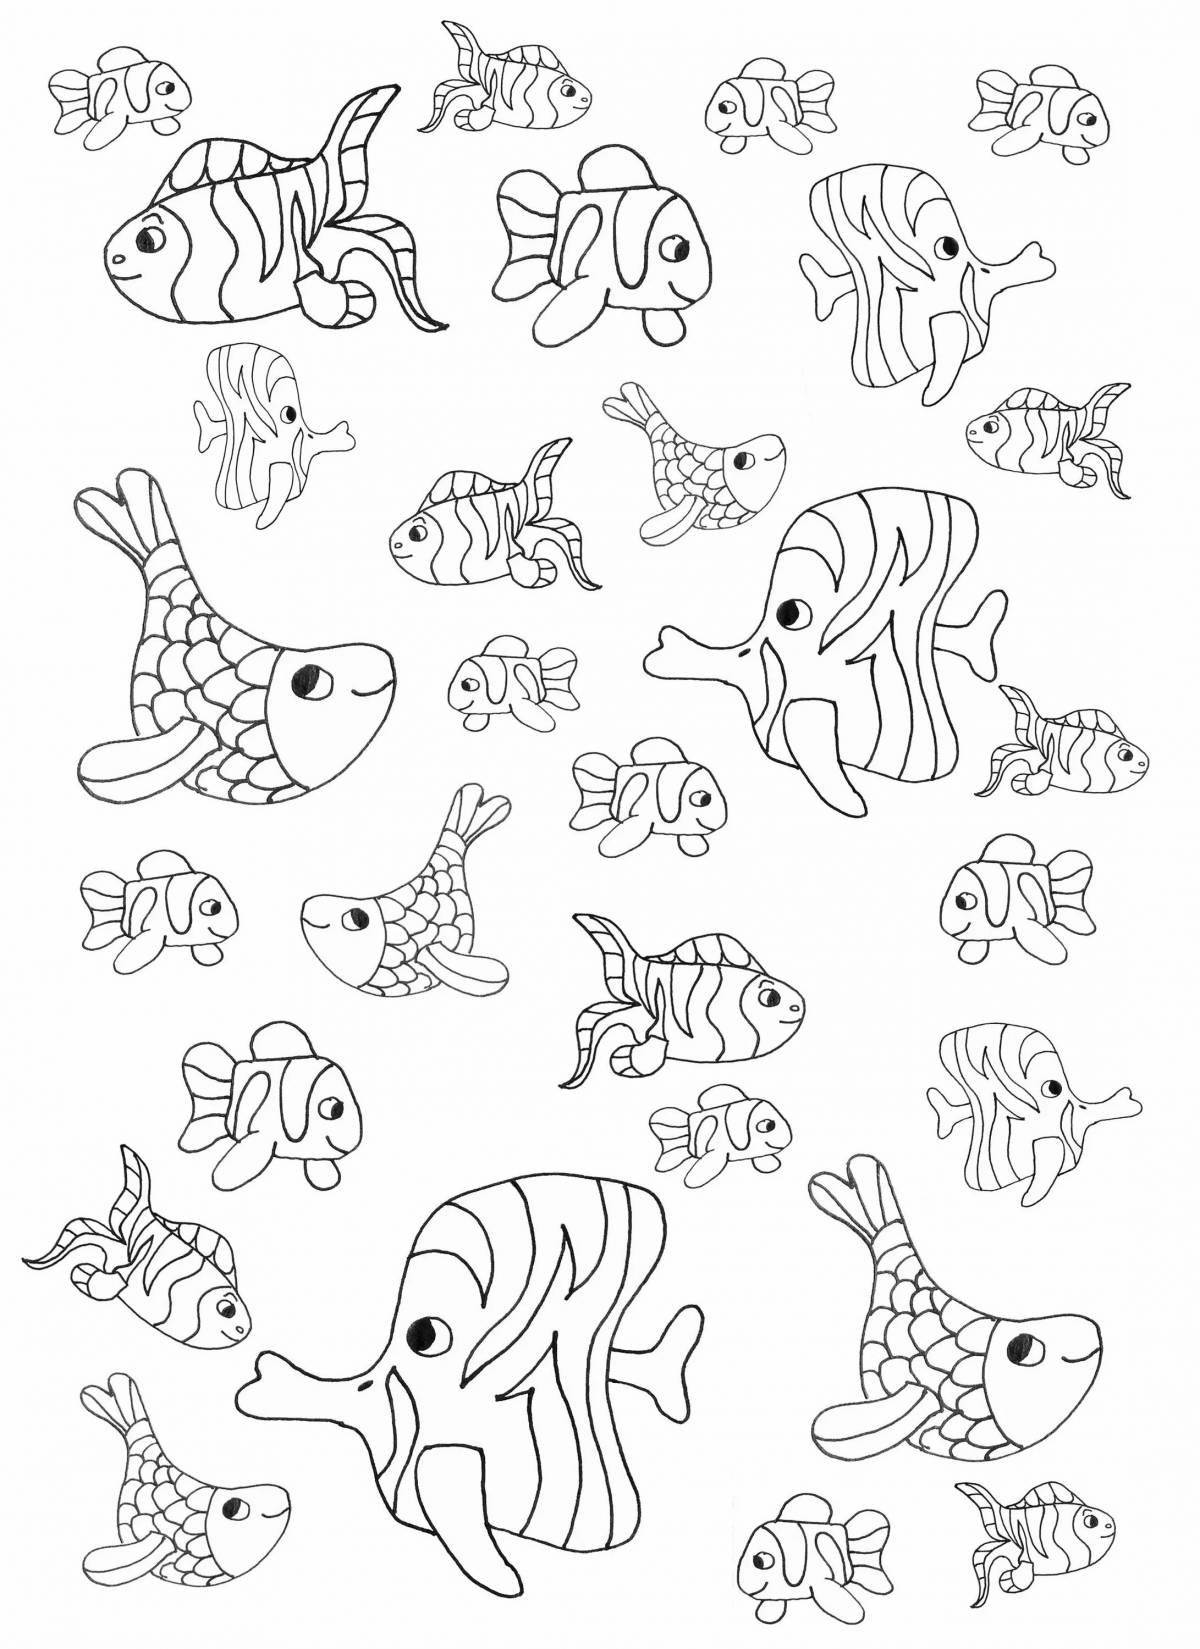 Awesome sea fish coloring page